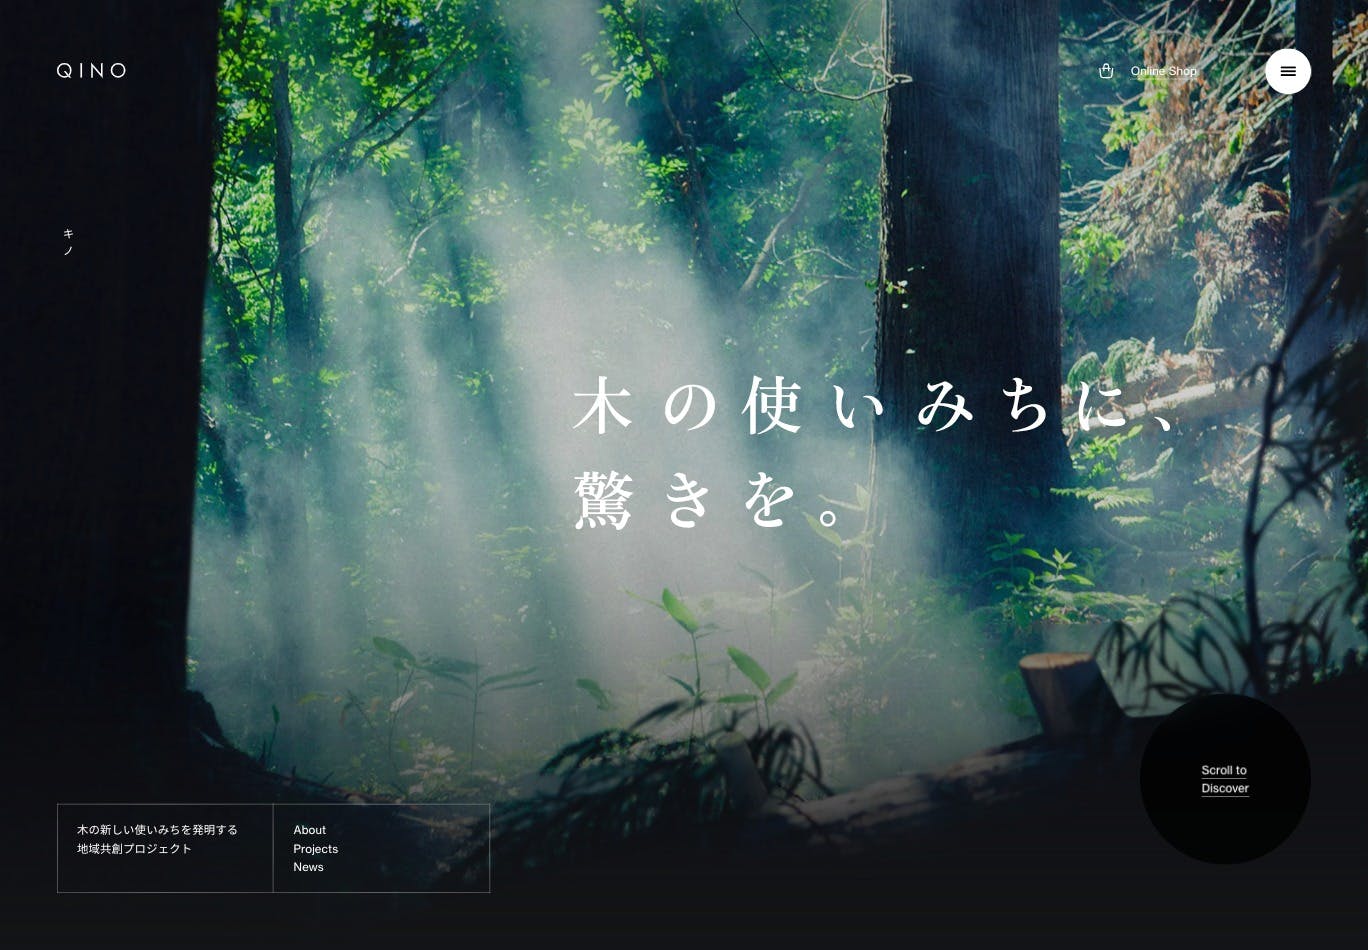 Cover Image for QINO – 木の新しい使いみちを発明する地域共創プロジェクト